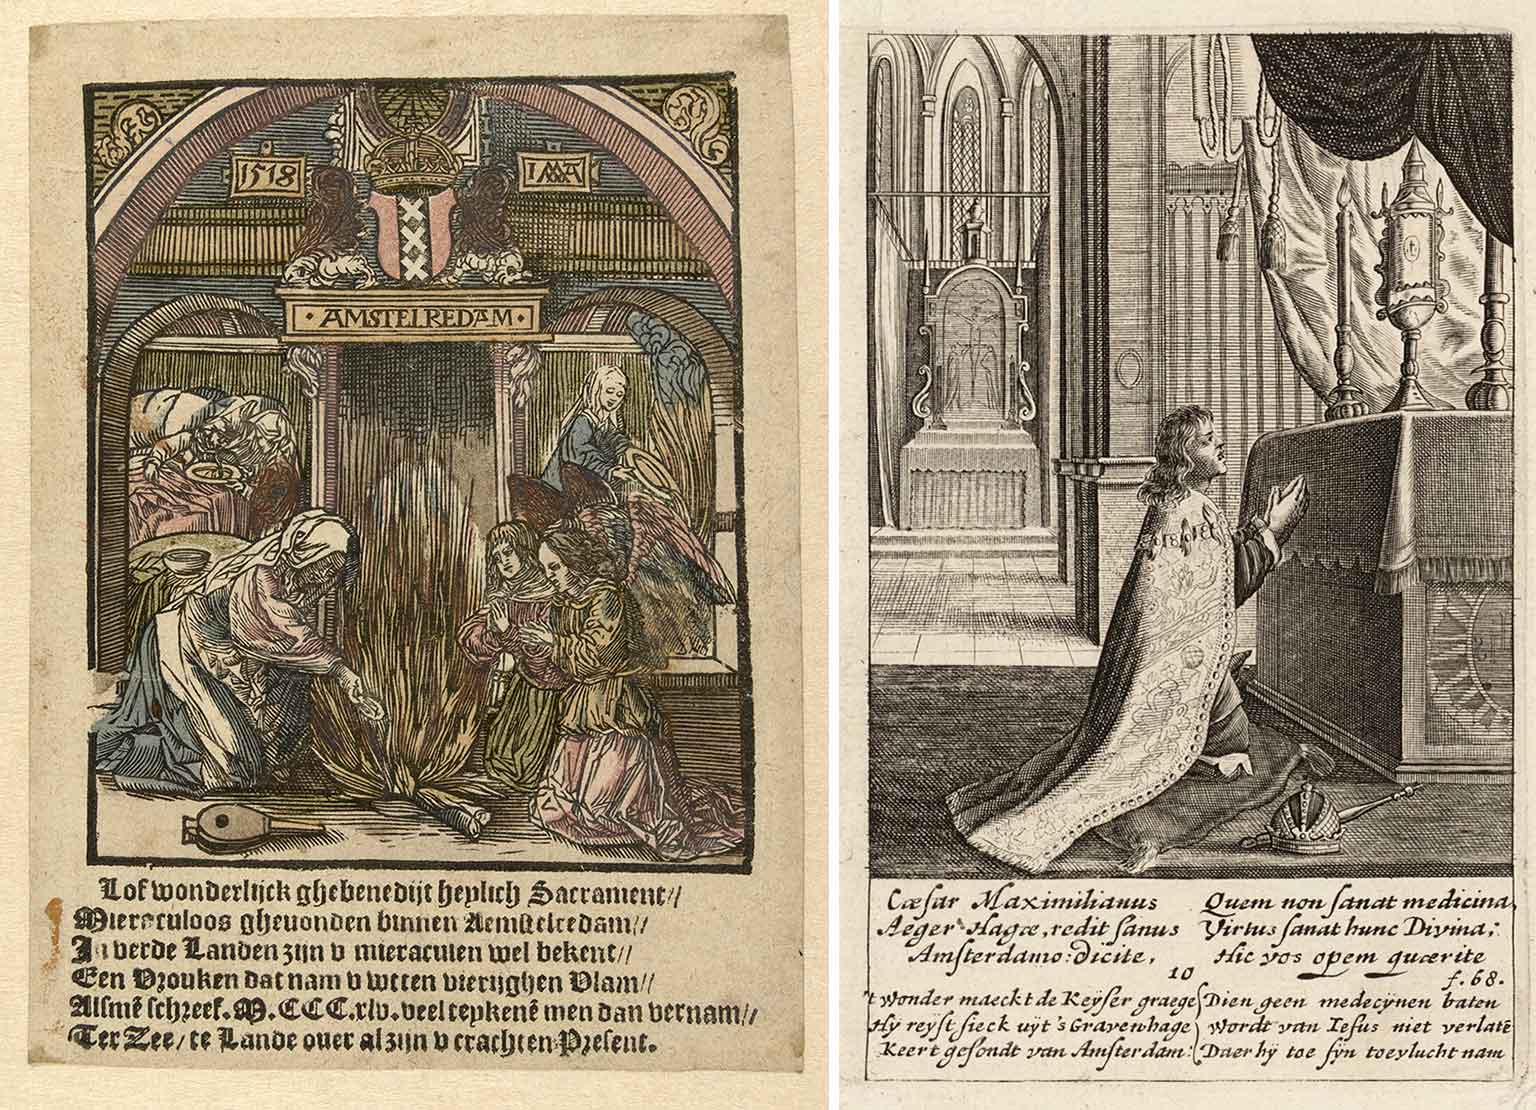 Miracle of Amsterdam prayer card and Emperor Maximilian I in 1484 at the Holy Stead, Amsterdam